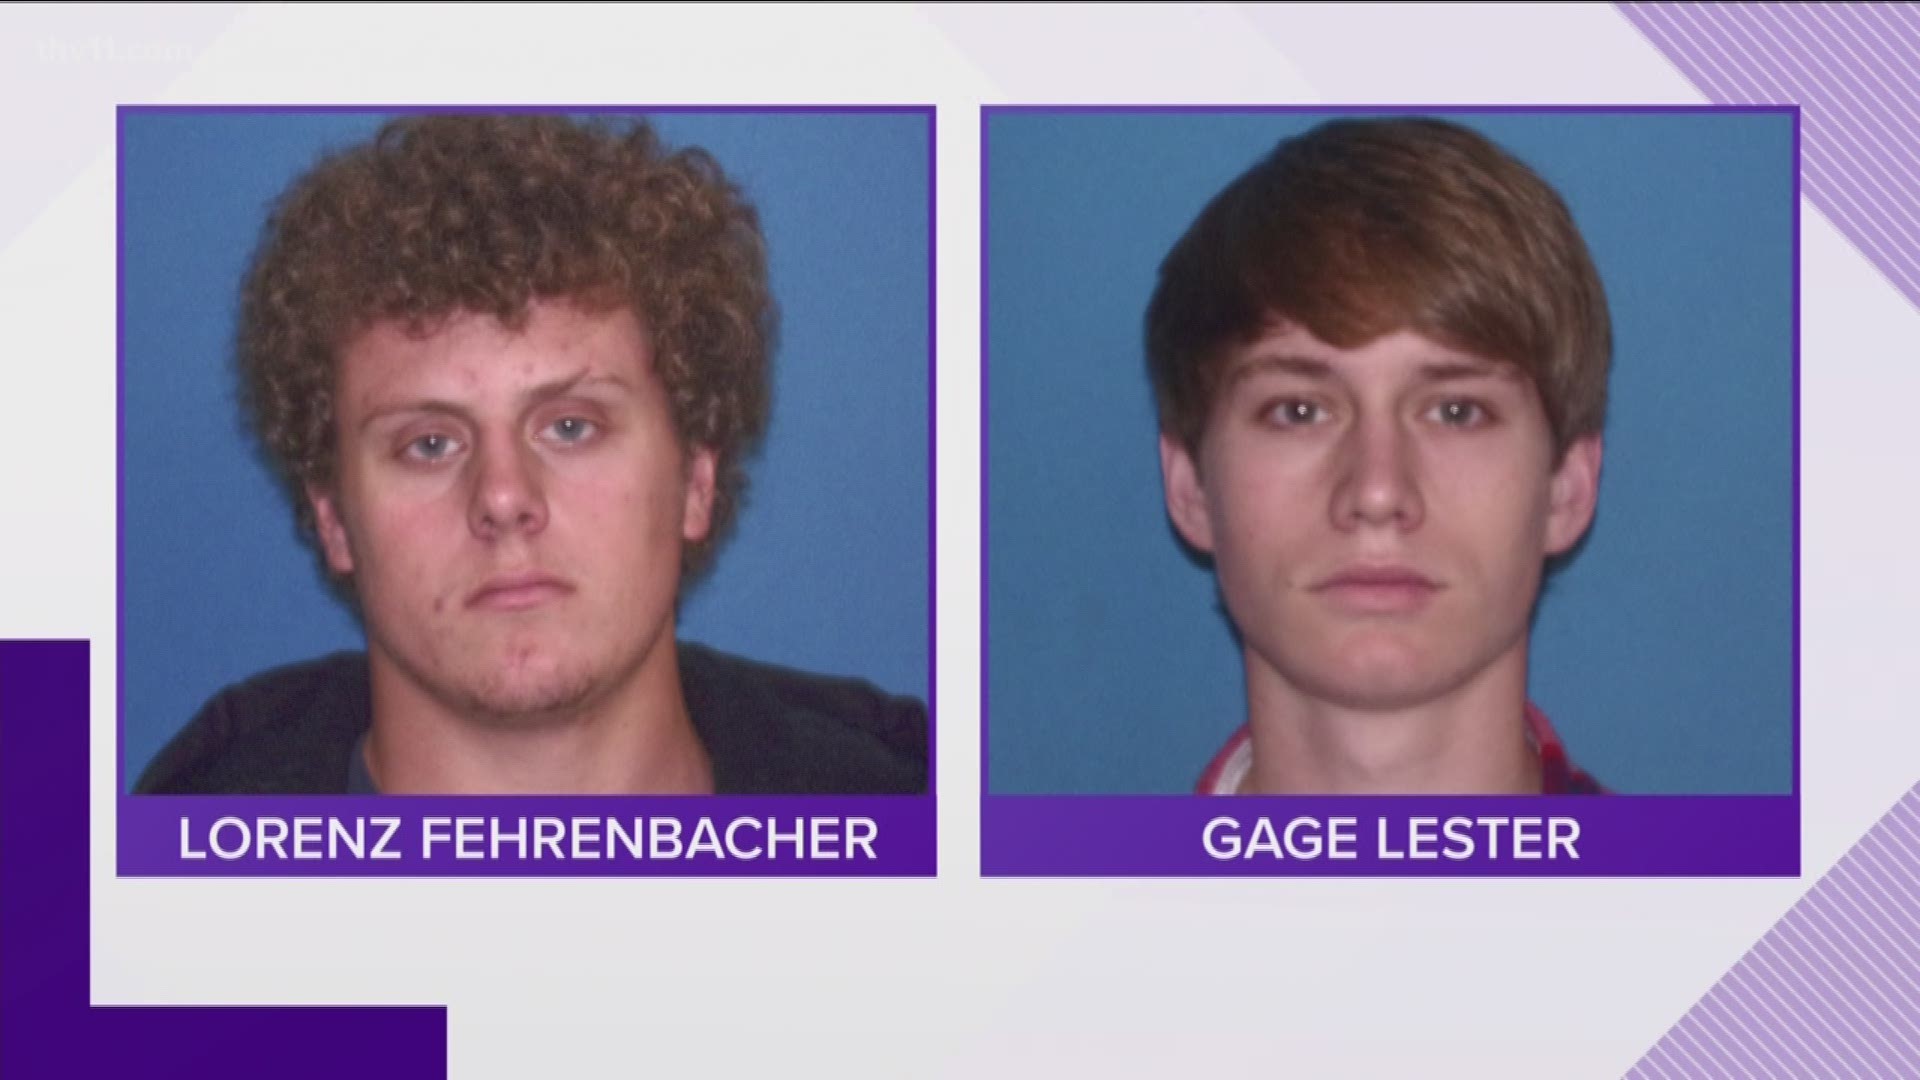 The two 18-year-olds were arrested following allegations of assault and hazing made last March.